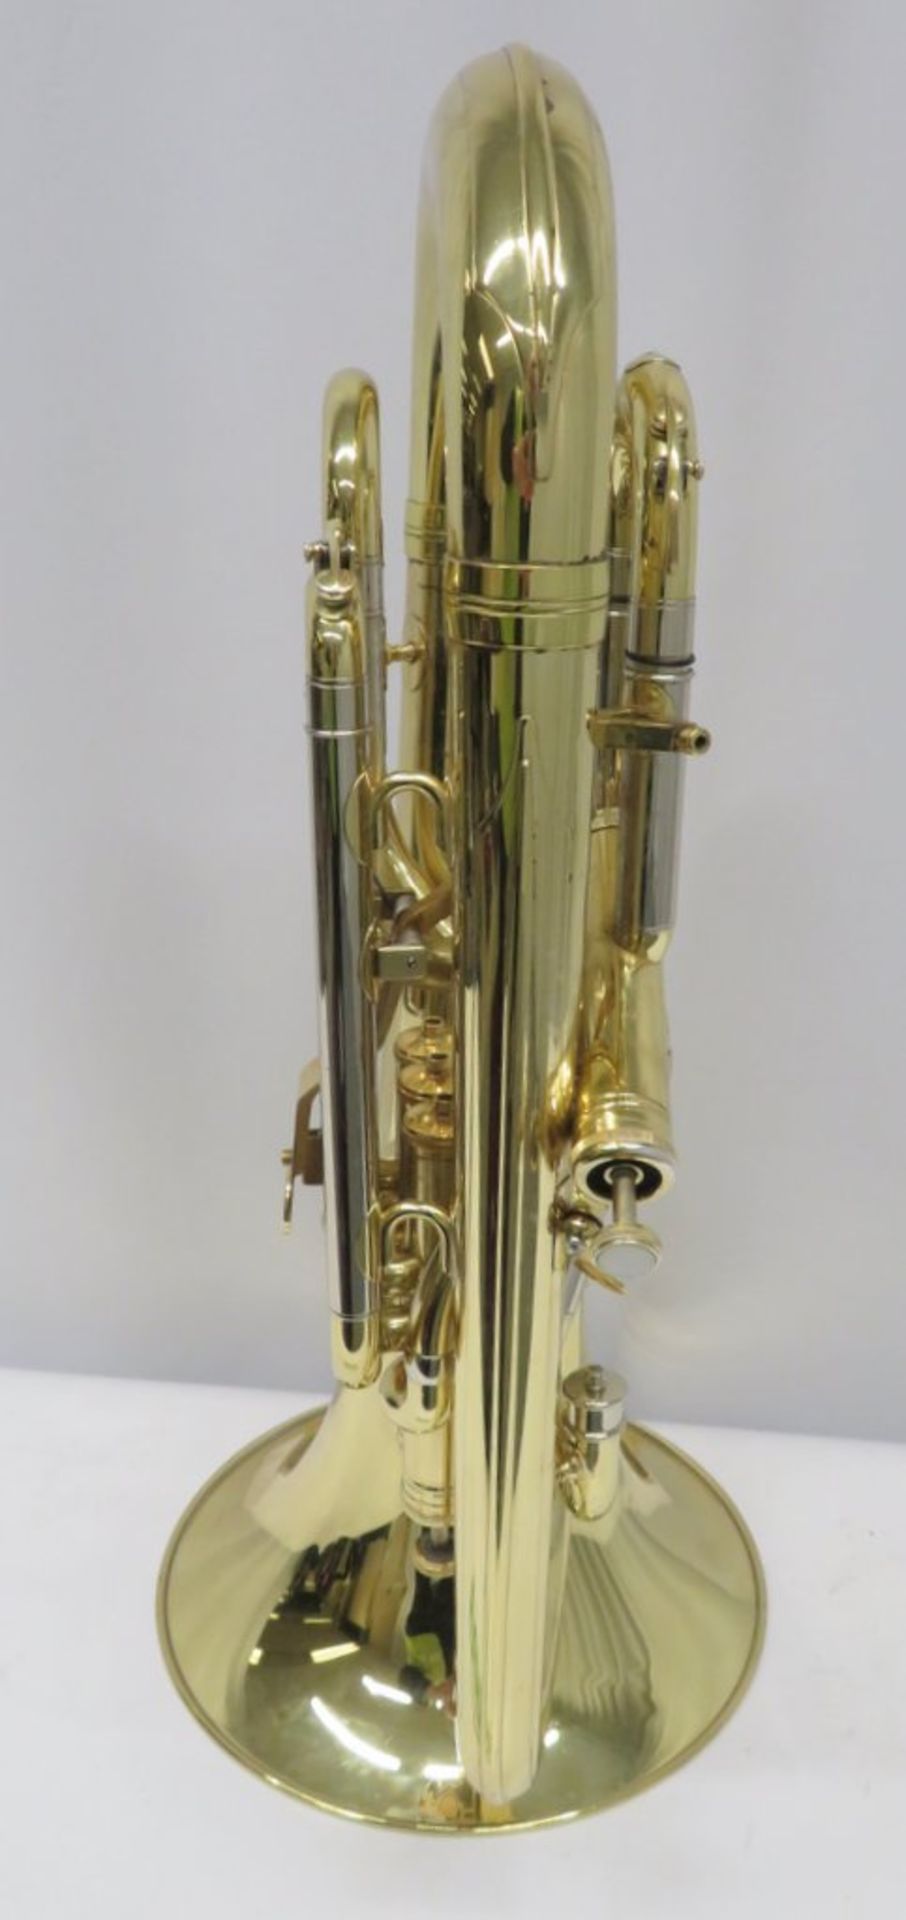 Besson Prestige BE2052 Euphonium With Case. Serial Number: 08300275. Please Note This Ite - Image 9 of 16